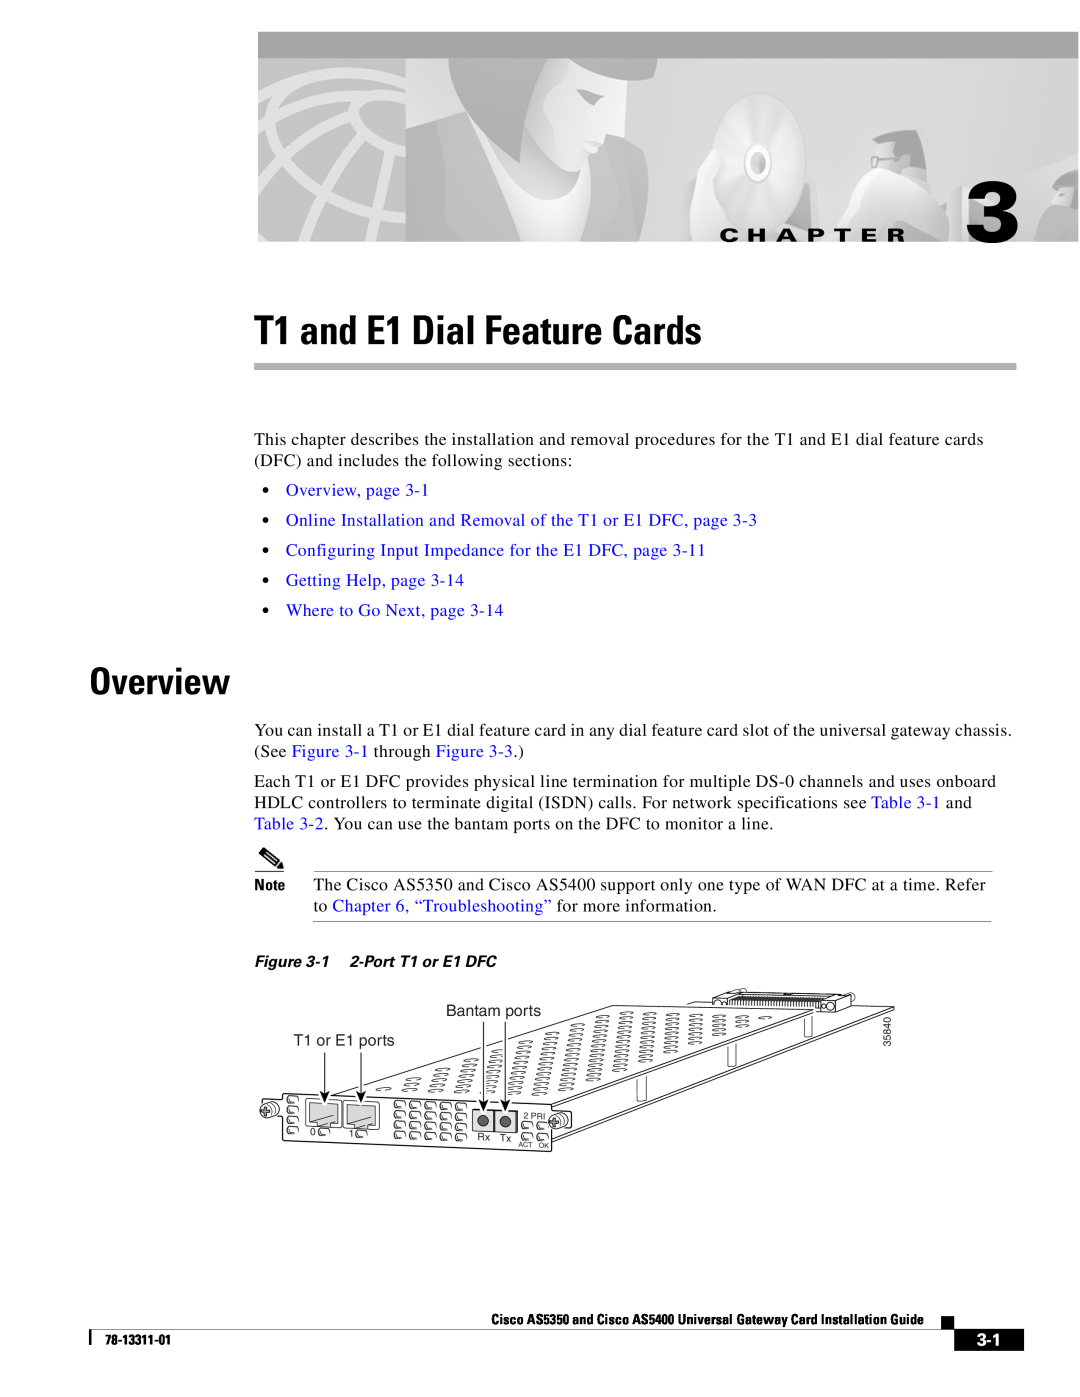 Cisco Systems AS5350, AS5400 manual T1 and E1 Dial Feature Cards, Overview, page, Where to Go Next, page, C H A P T E R 